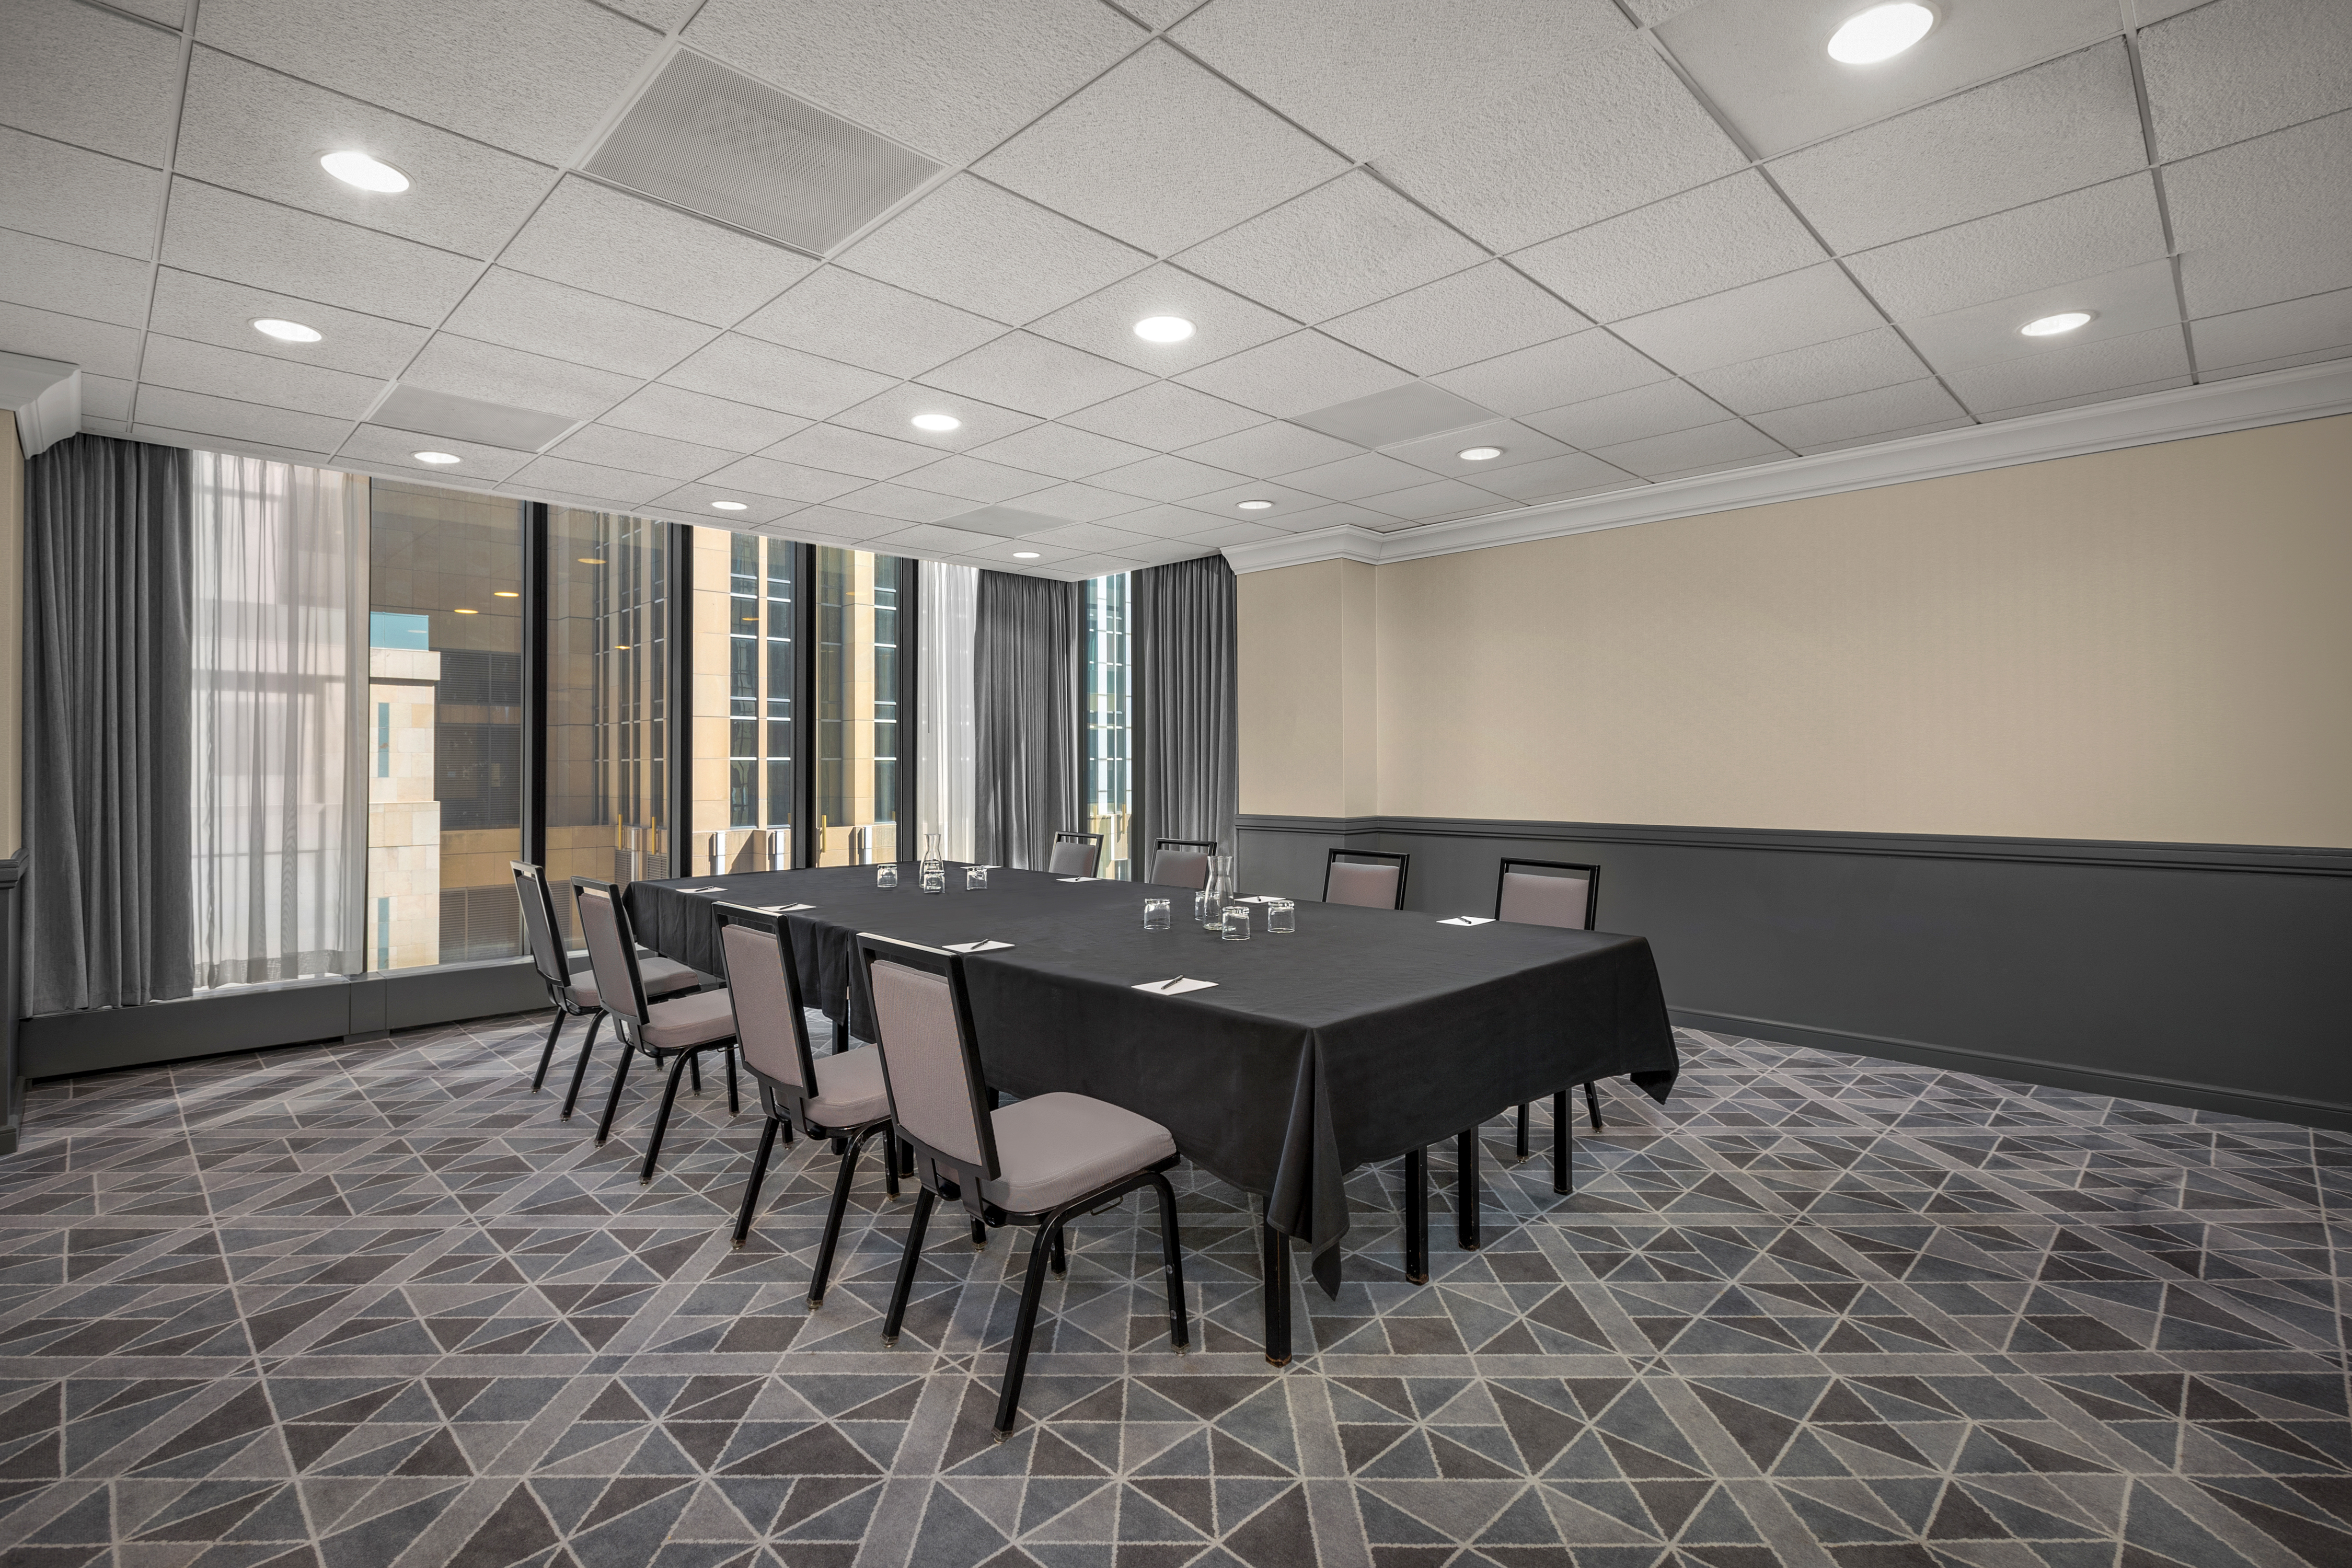 Lake Ontario Meeting Room with Seating for Eight Guests